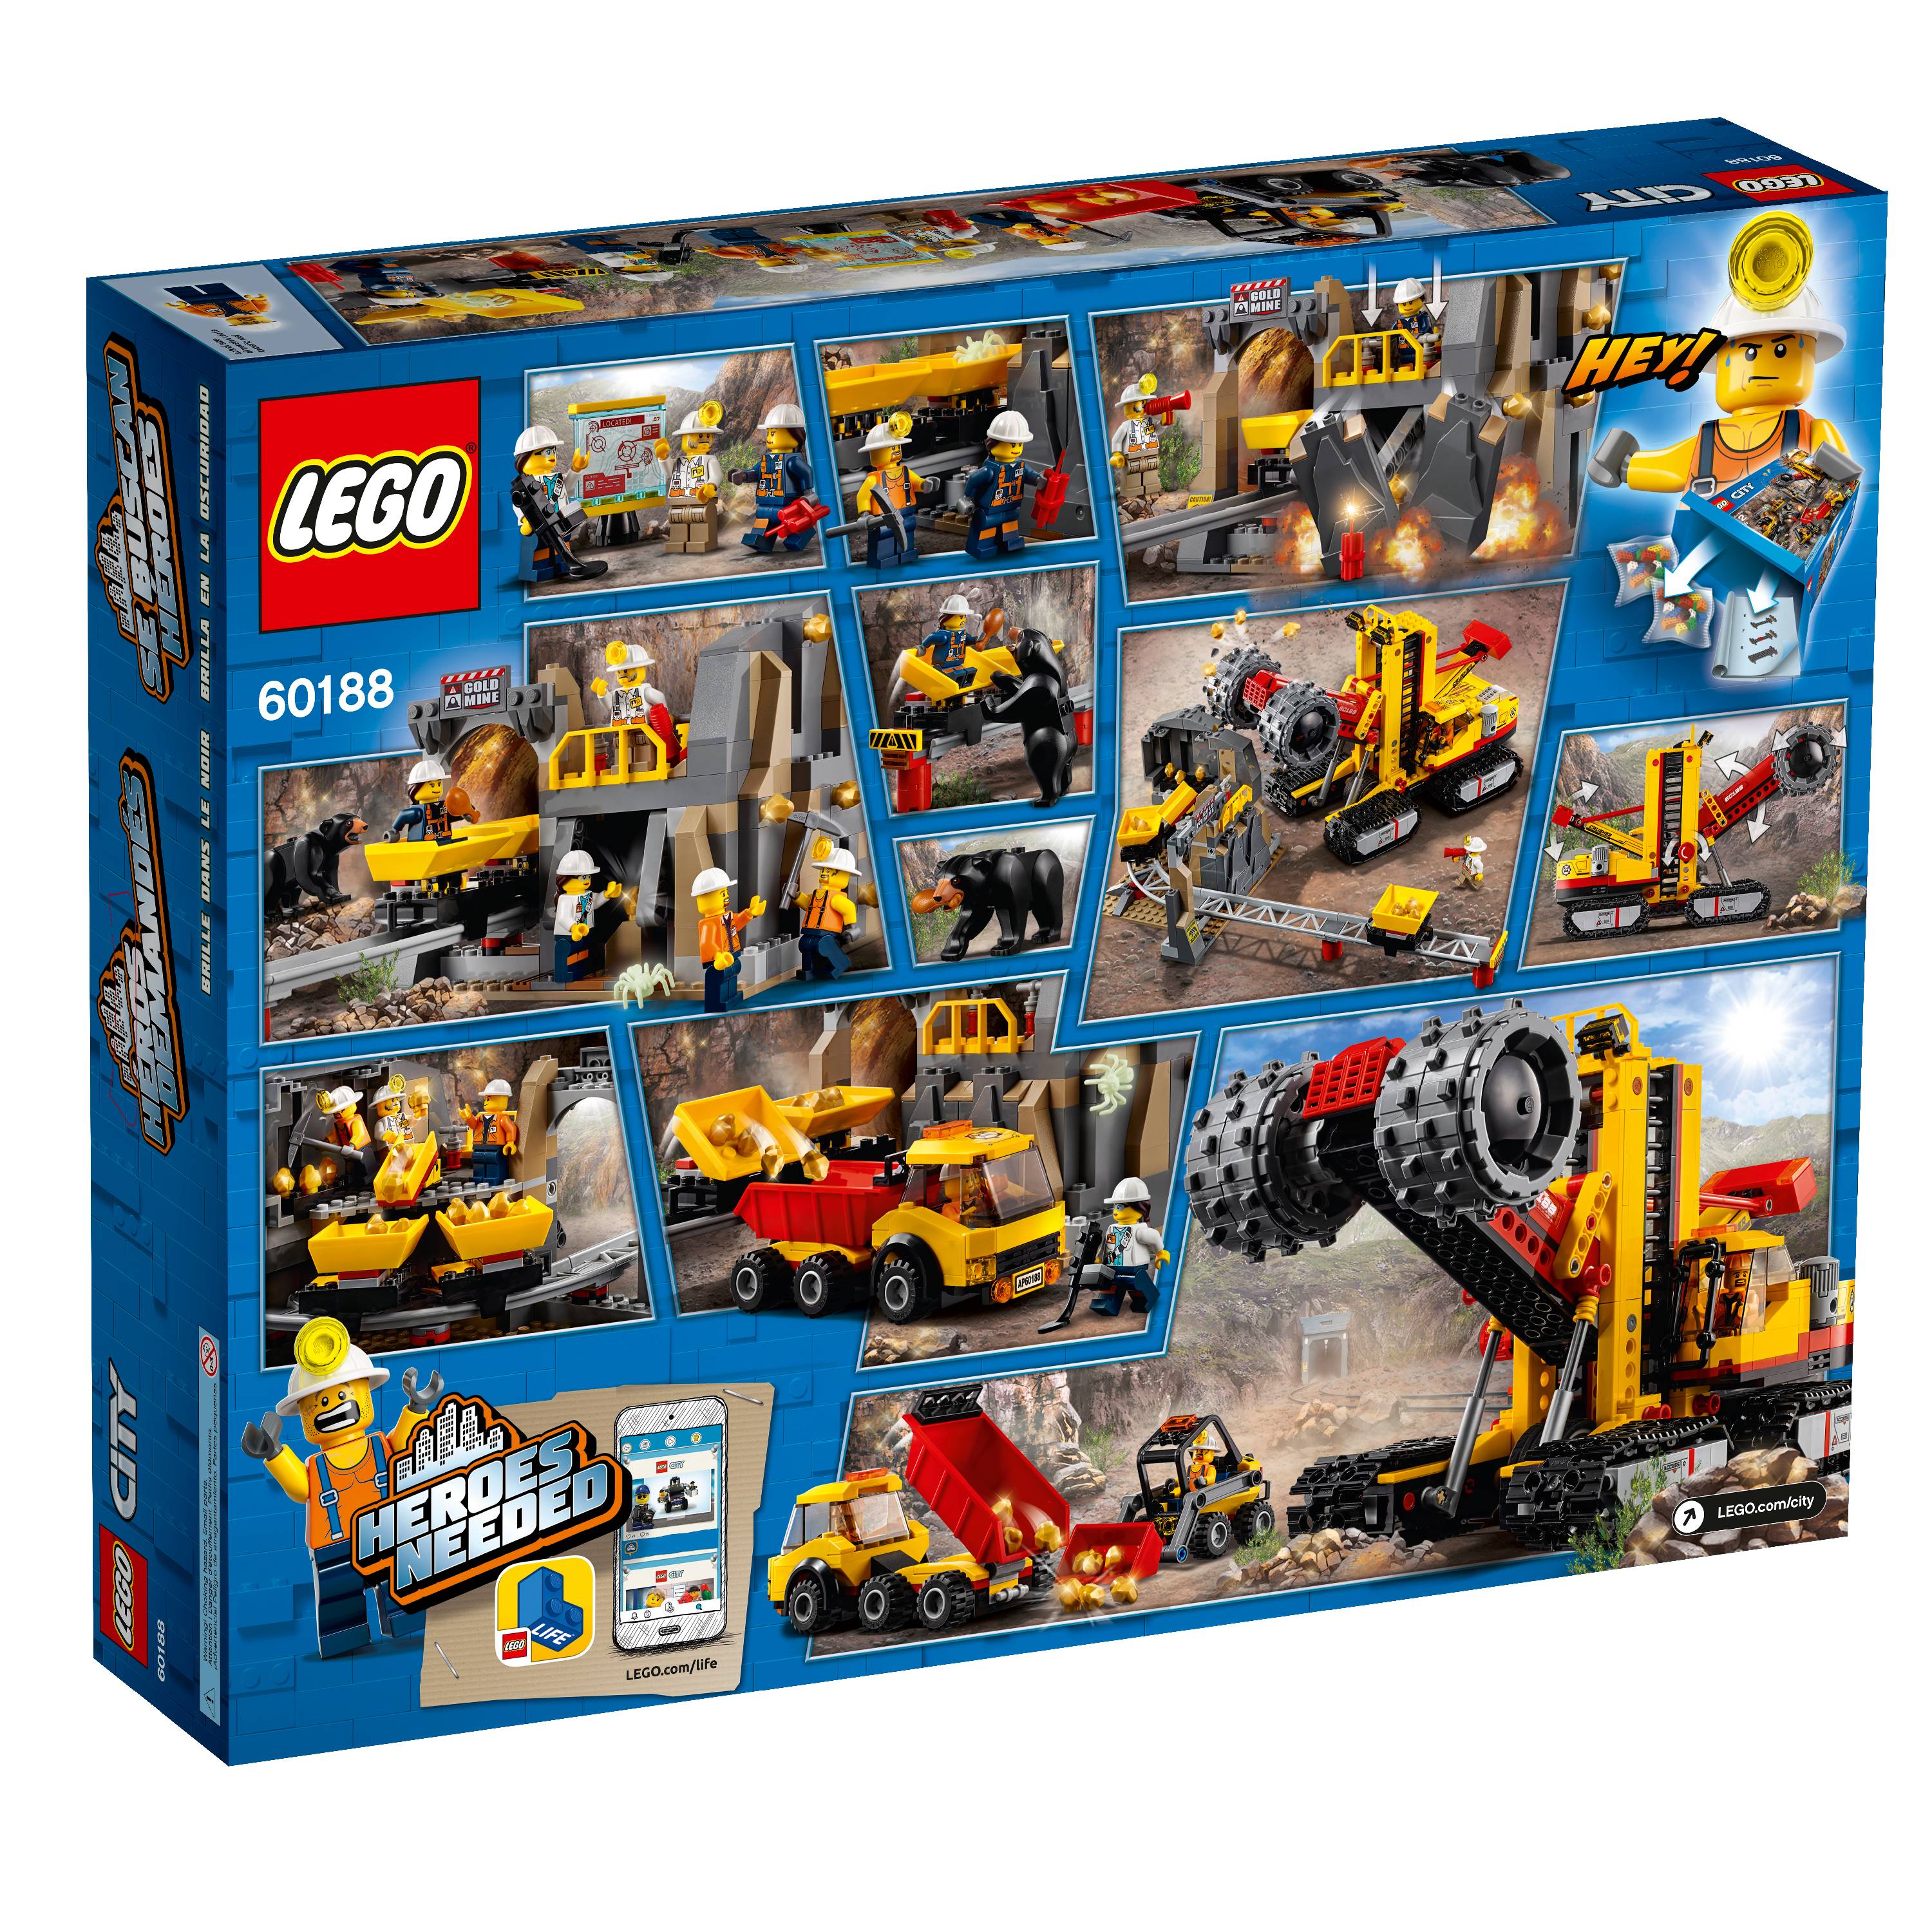 LEGO City Mining Experts Site 60188 Building Set (883 Pieces) - image 5 of 7